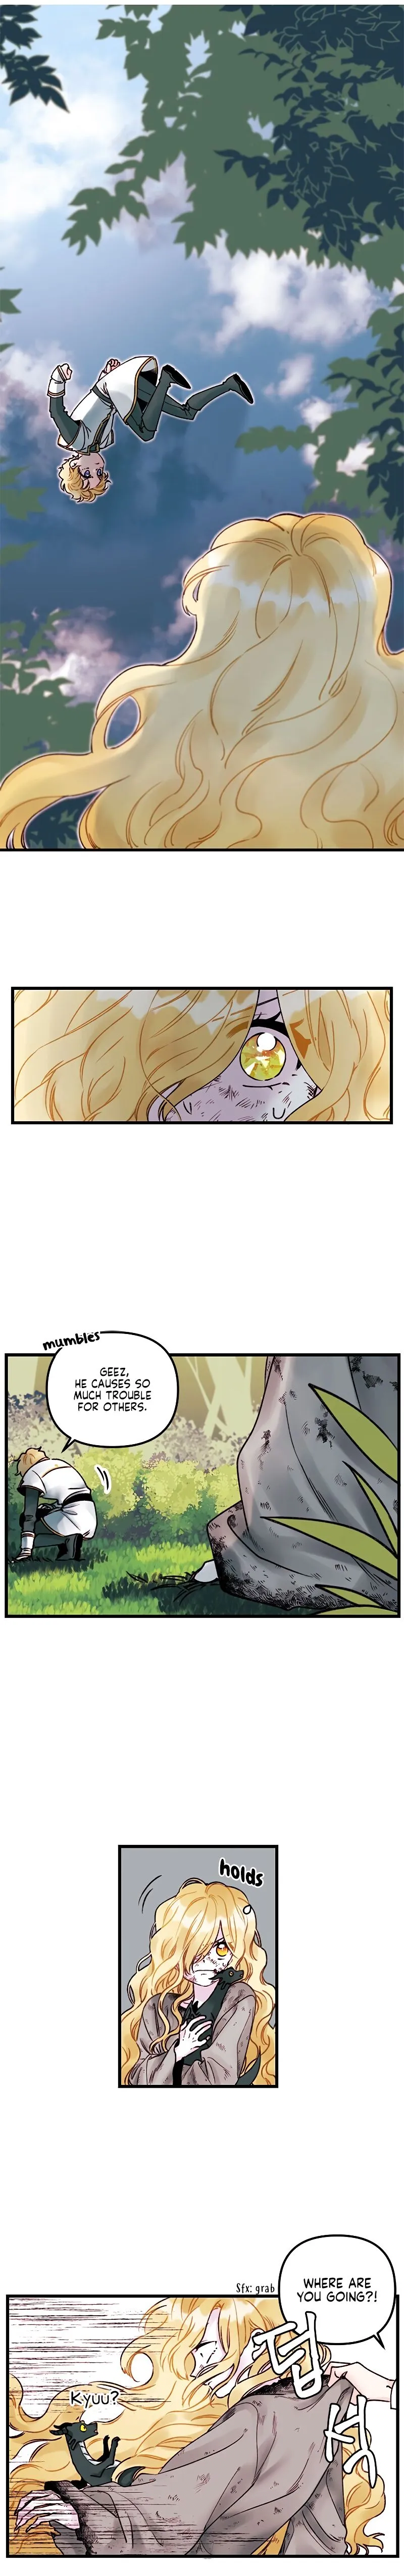 The Princess in the Dumpster Chapter 2 page 7